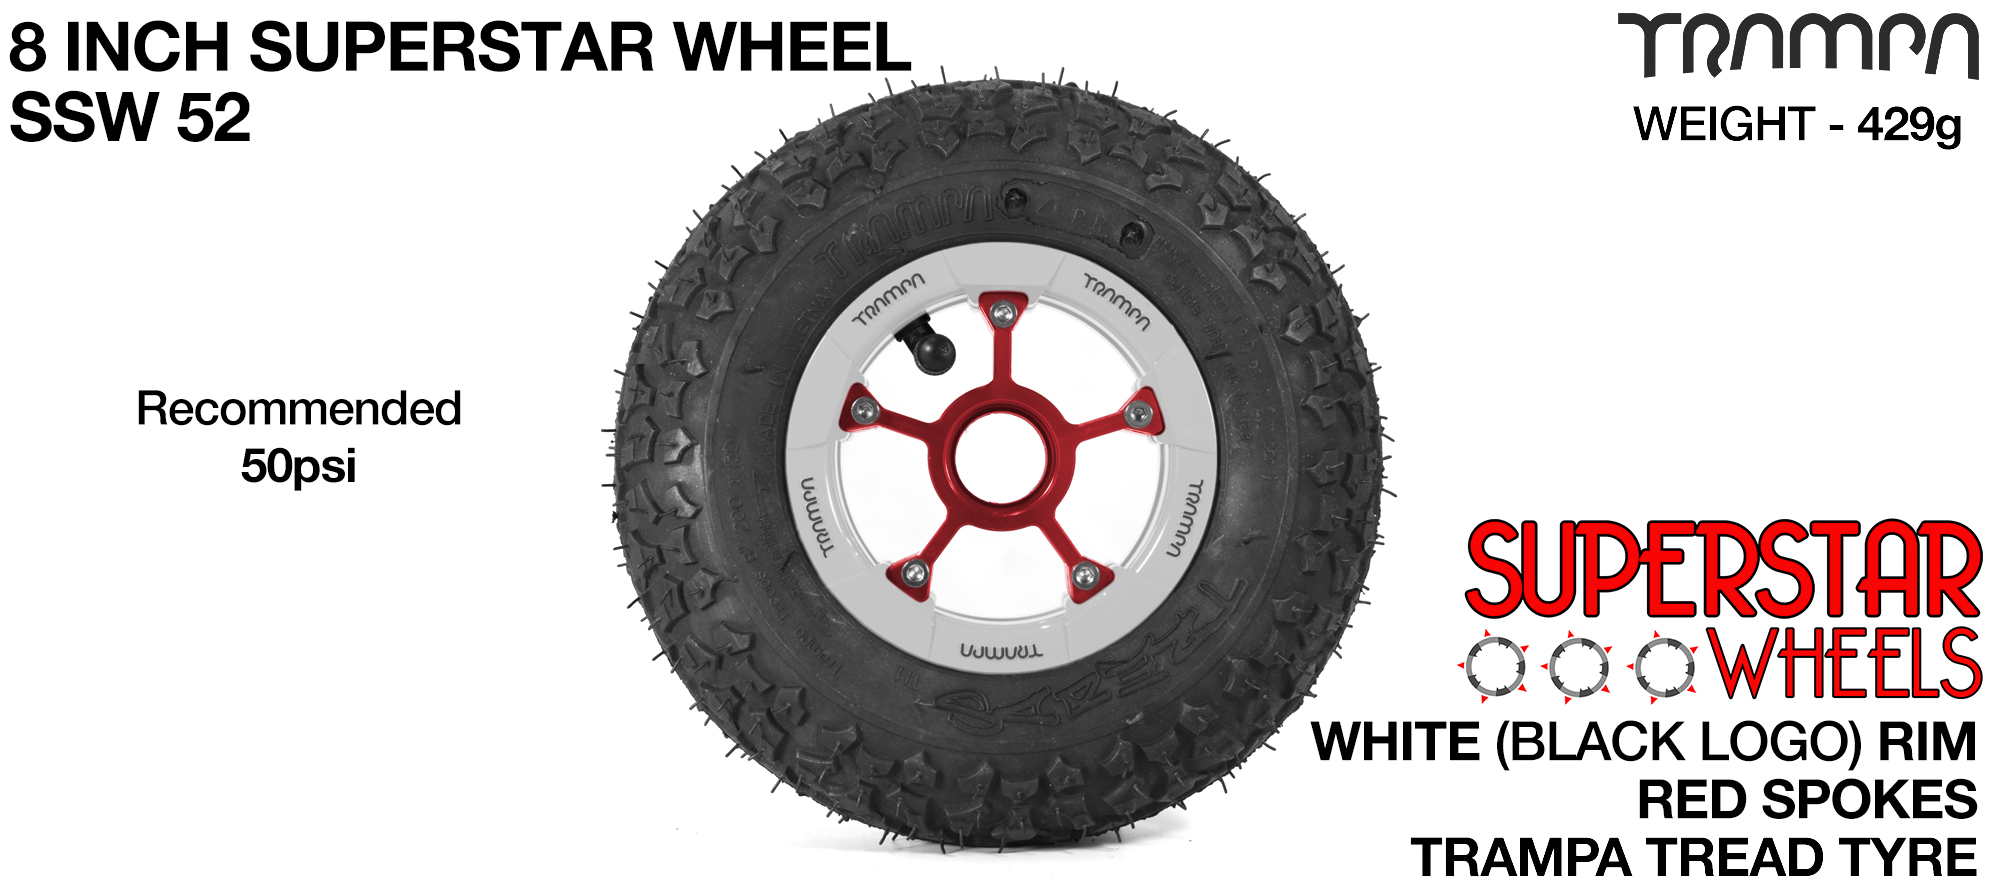 Superstar 8 inch wheel - White Gloss Rim with Red Anodised spokes & TRAMPA TREAD 8 Inch Tyres